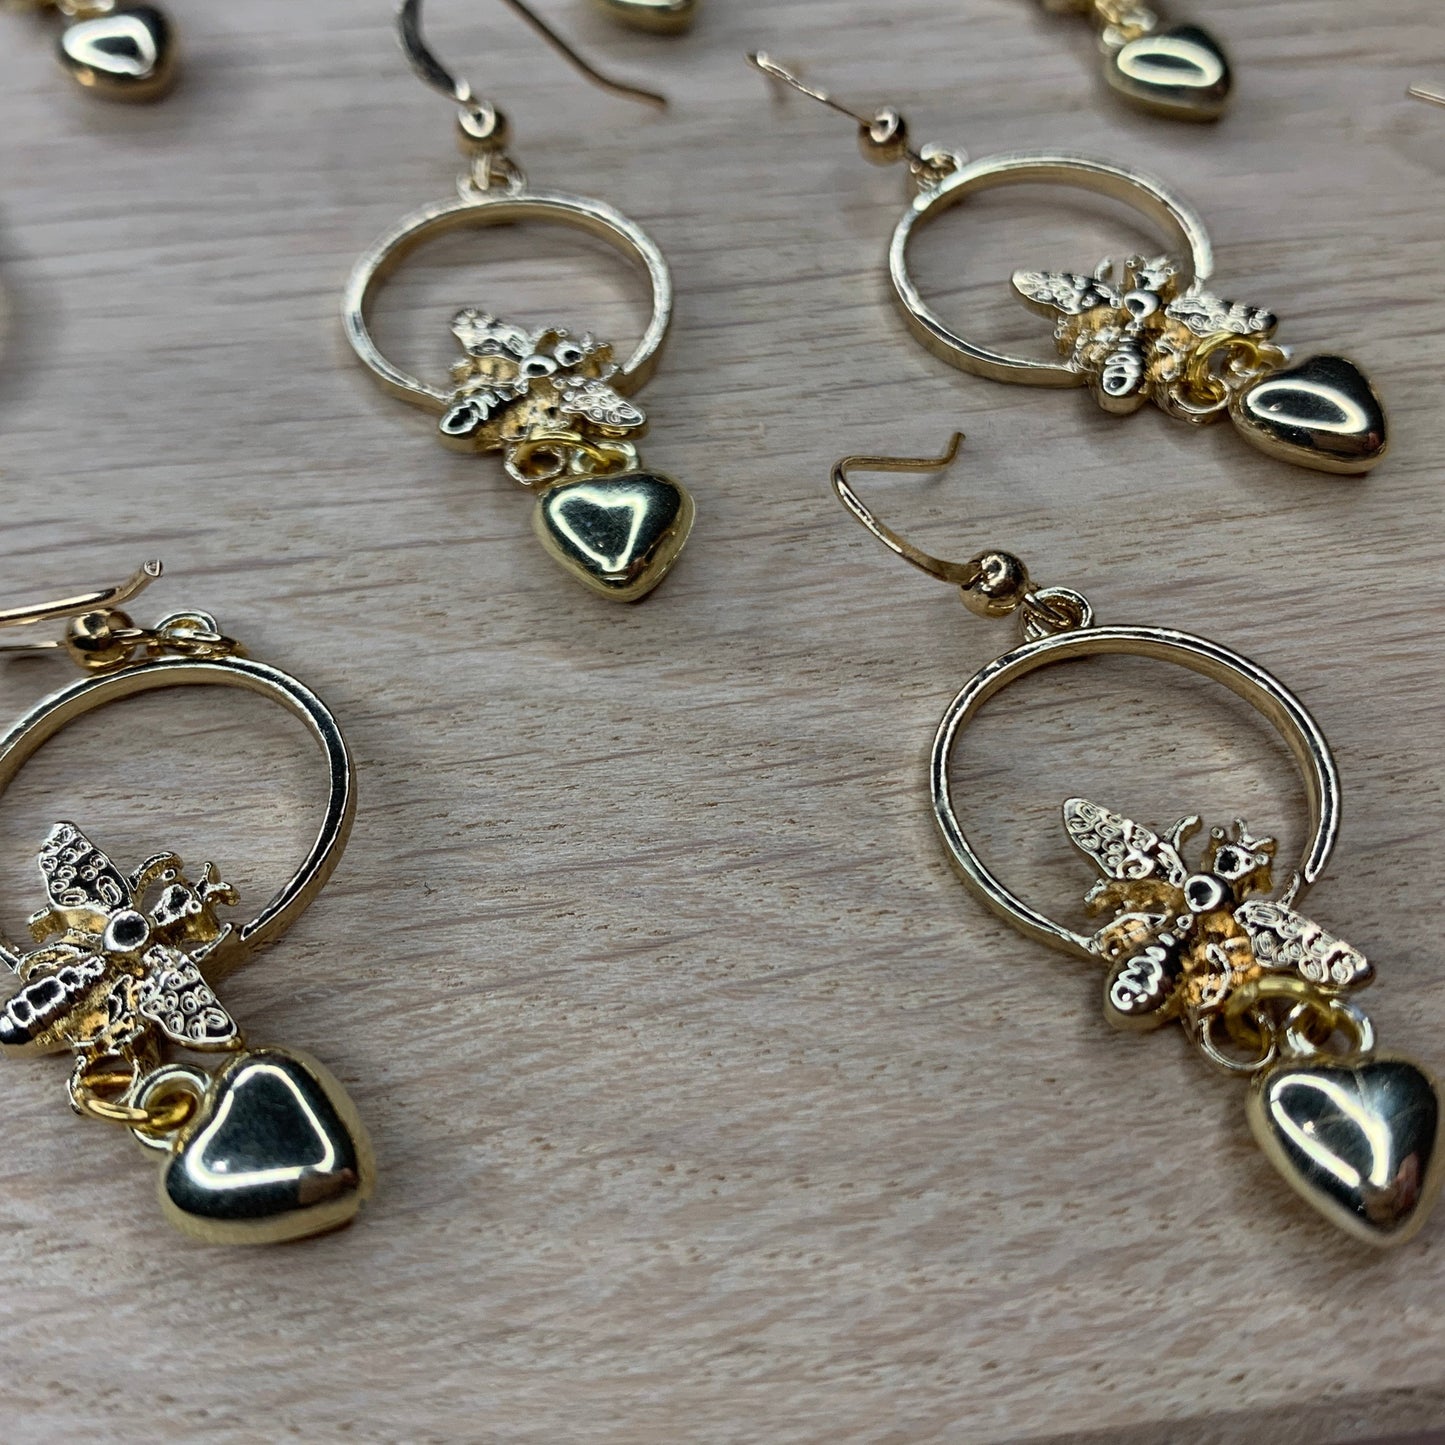 Gold Bee Dangle Drop Earrings with Heart Charm - Lxyclr Authentic